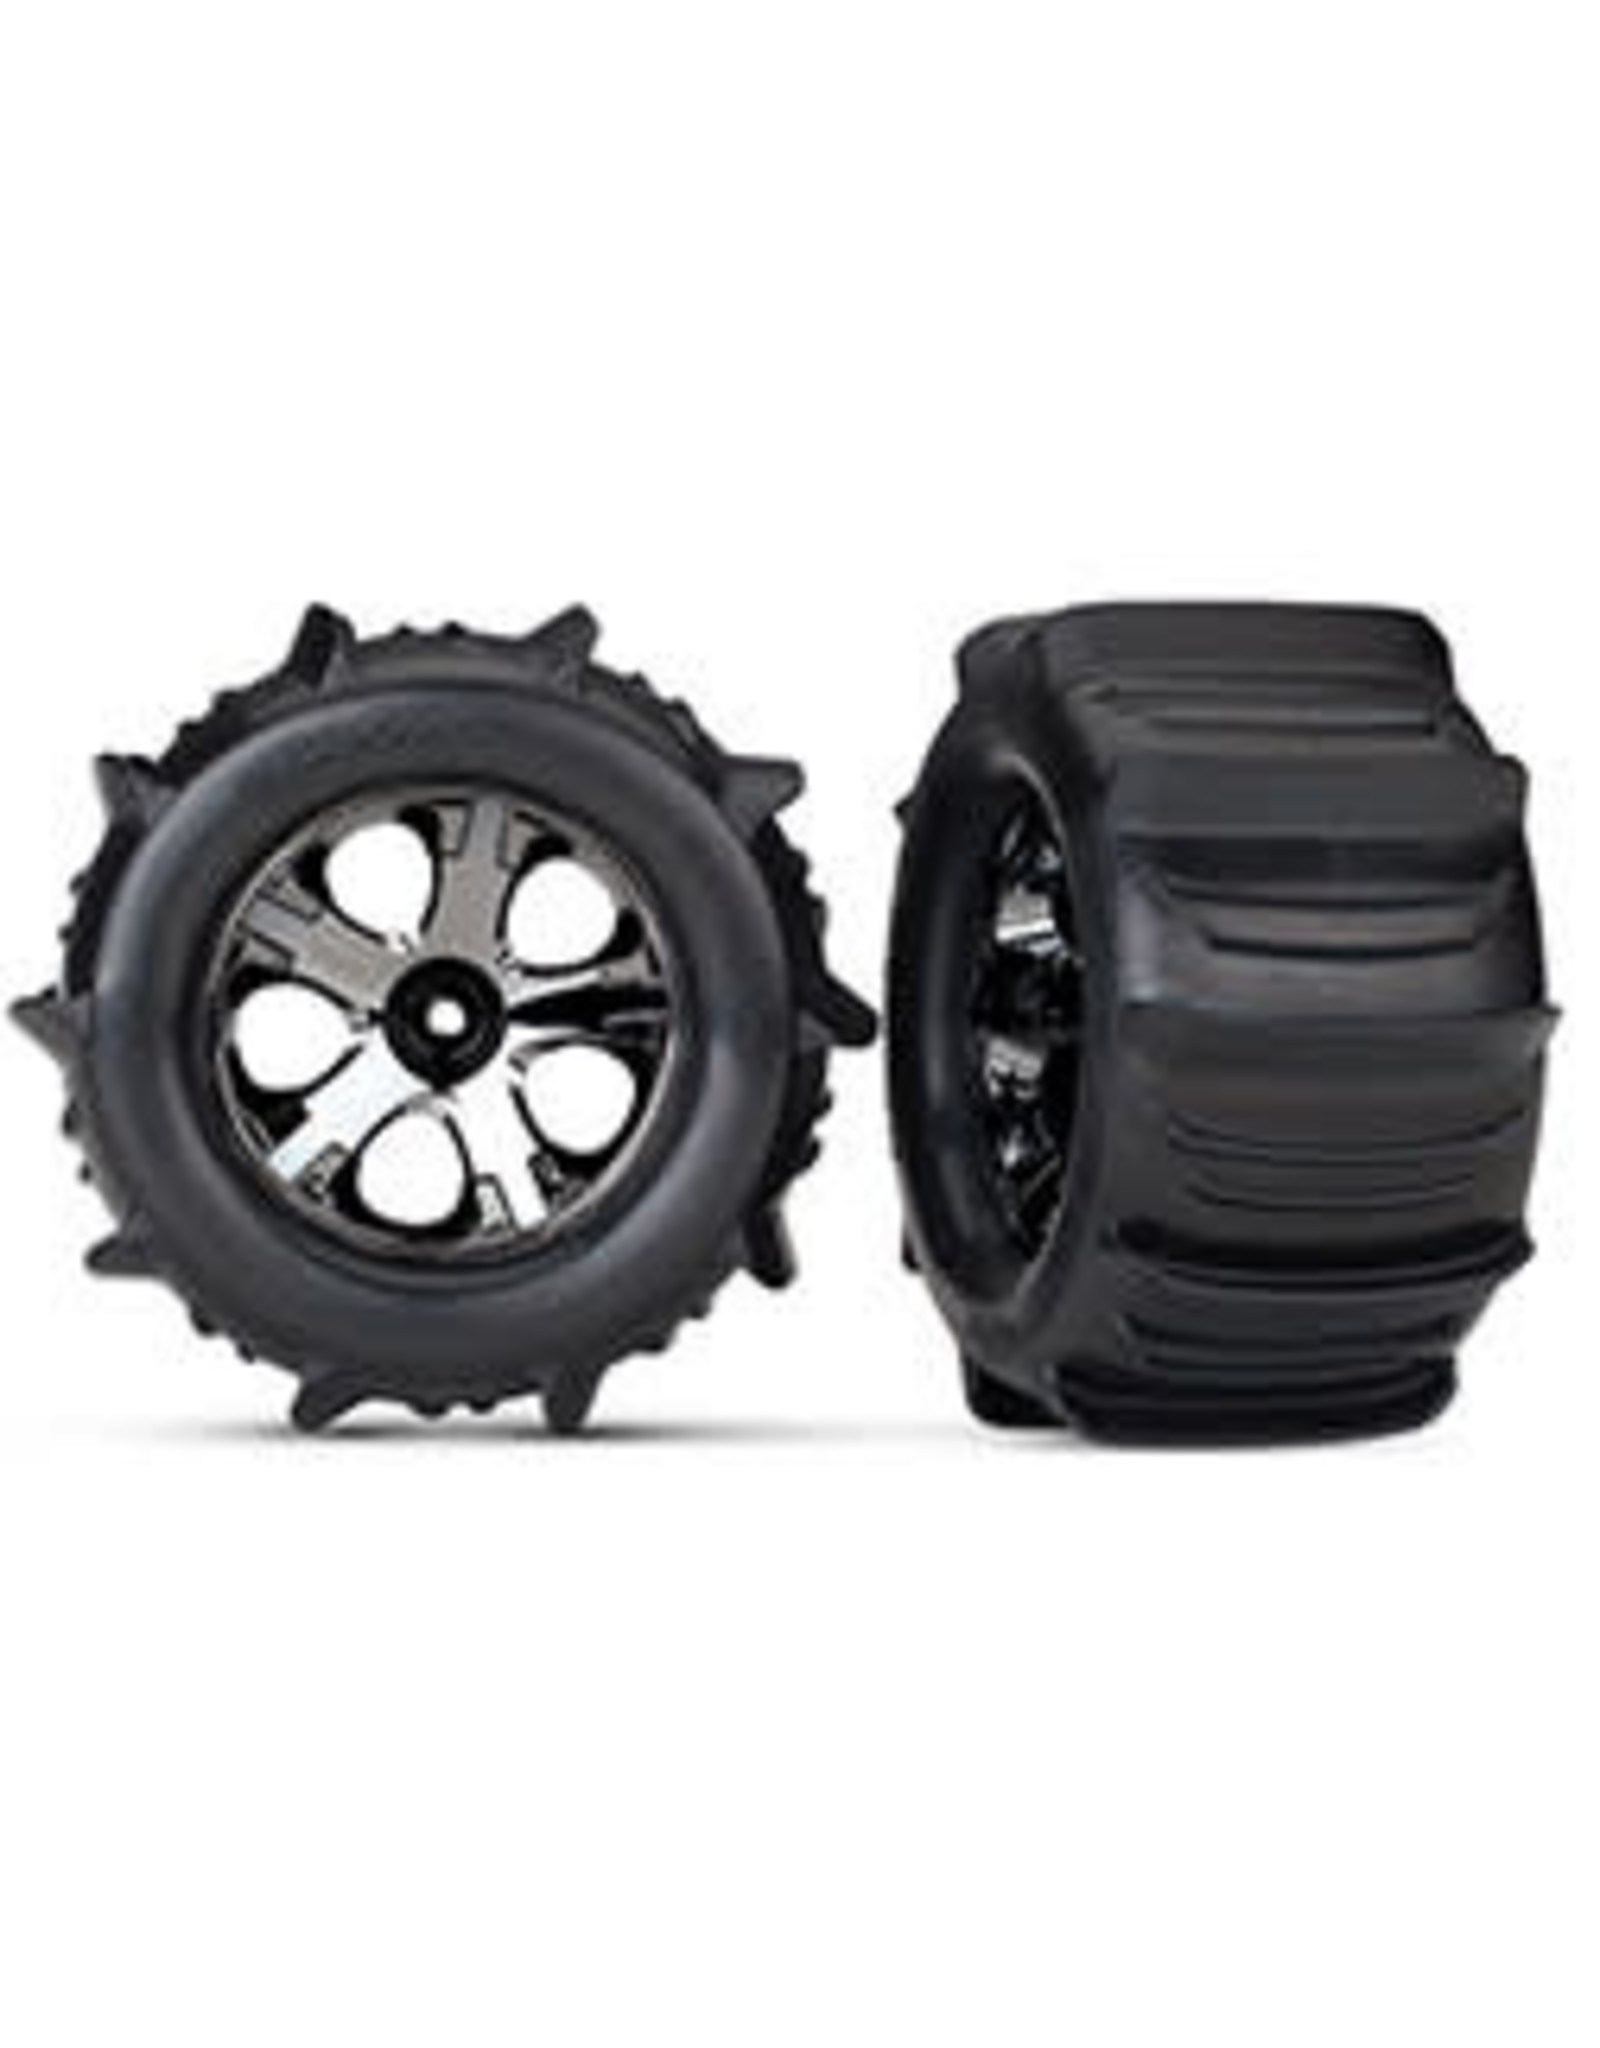 Traxxas Tires & wheels, assembled, glued (2.8') (All-Star black chrome wheels, paddle tires, foam inserts) (nitro rear/electric front) (2) (TSM rated)